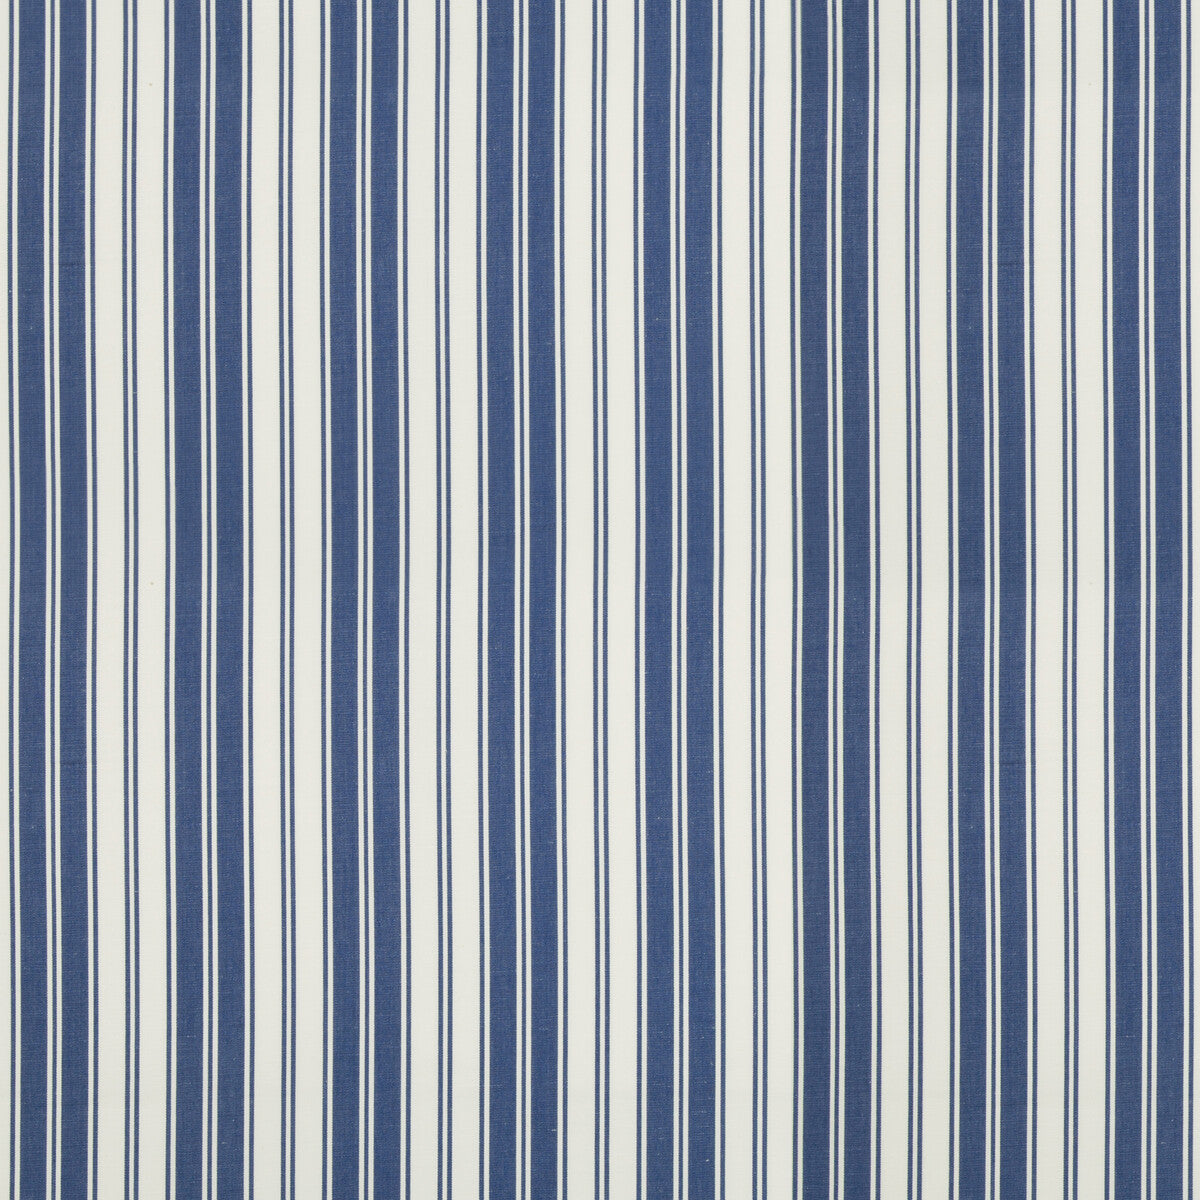 Audemar Stripe fabric in blue color - pattern 8019106.5.0 - by Brunschwig &amp; Fils in the Normant Checks And Stripes collection